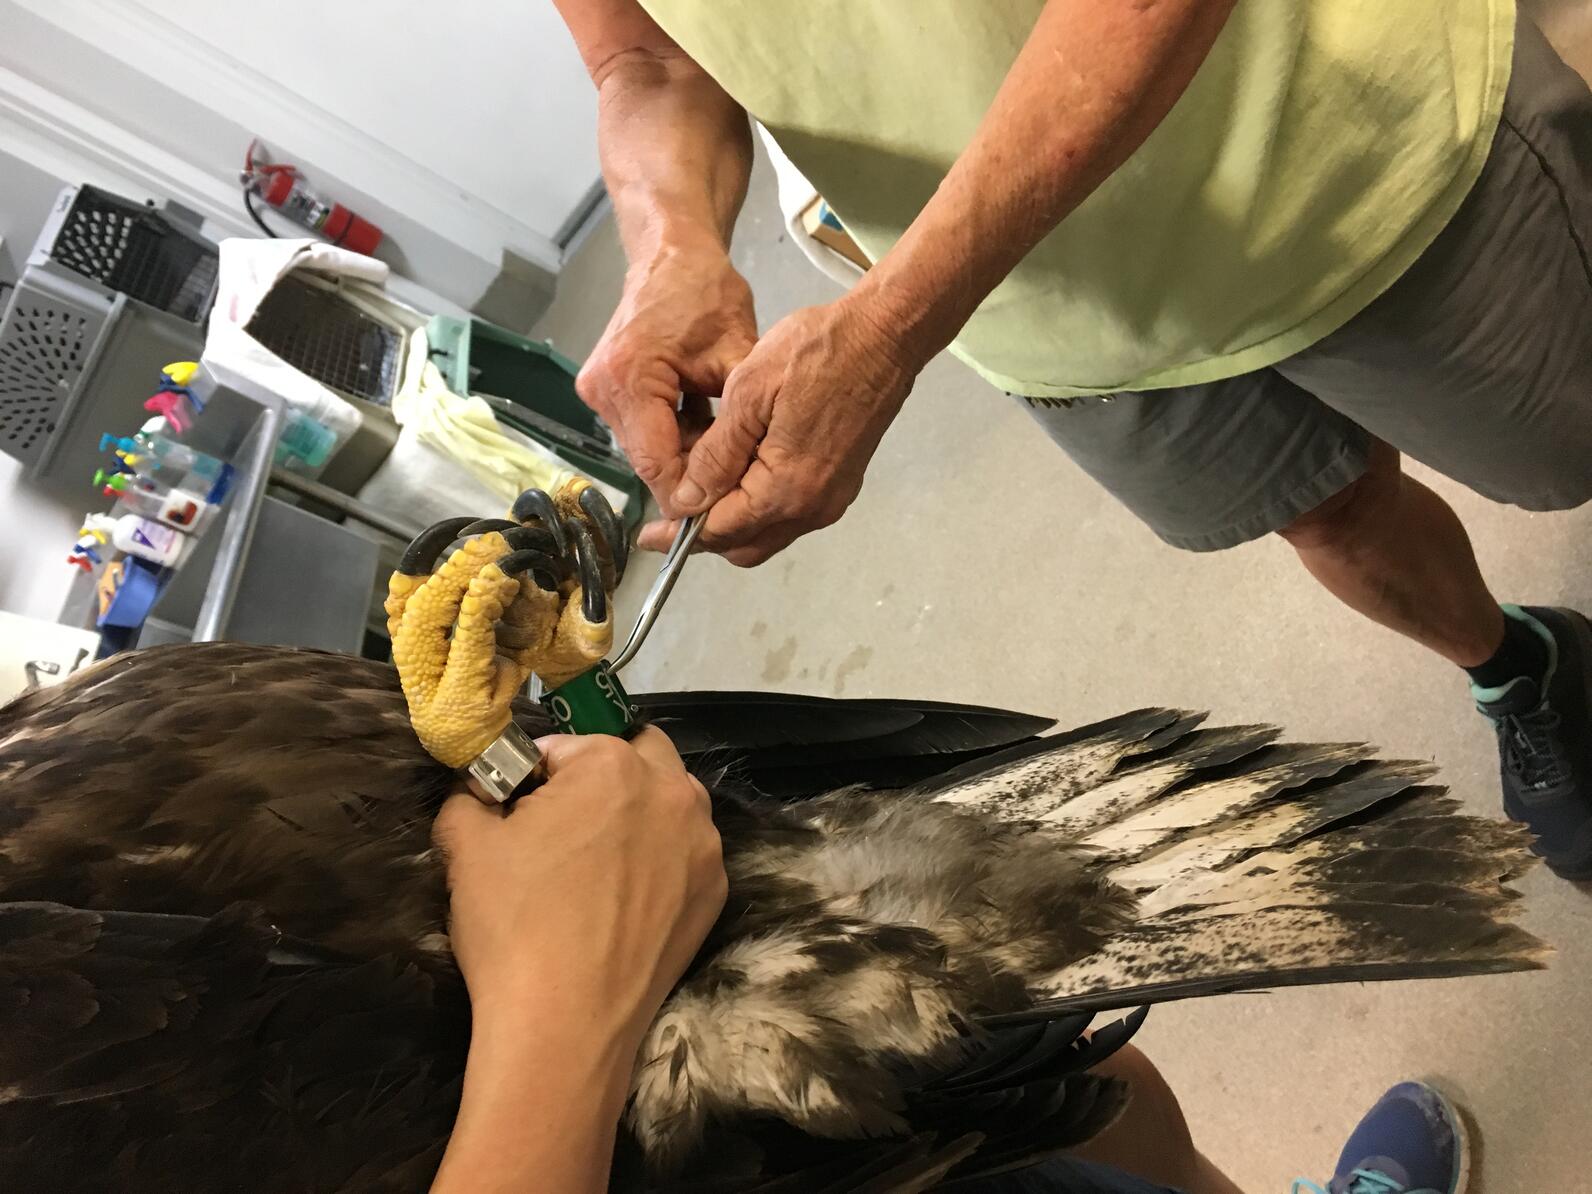 Bands on a Bald Eagle's legs showing K05 as the band identification. Staff holding the bird.